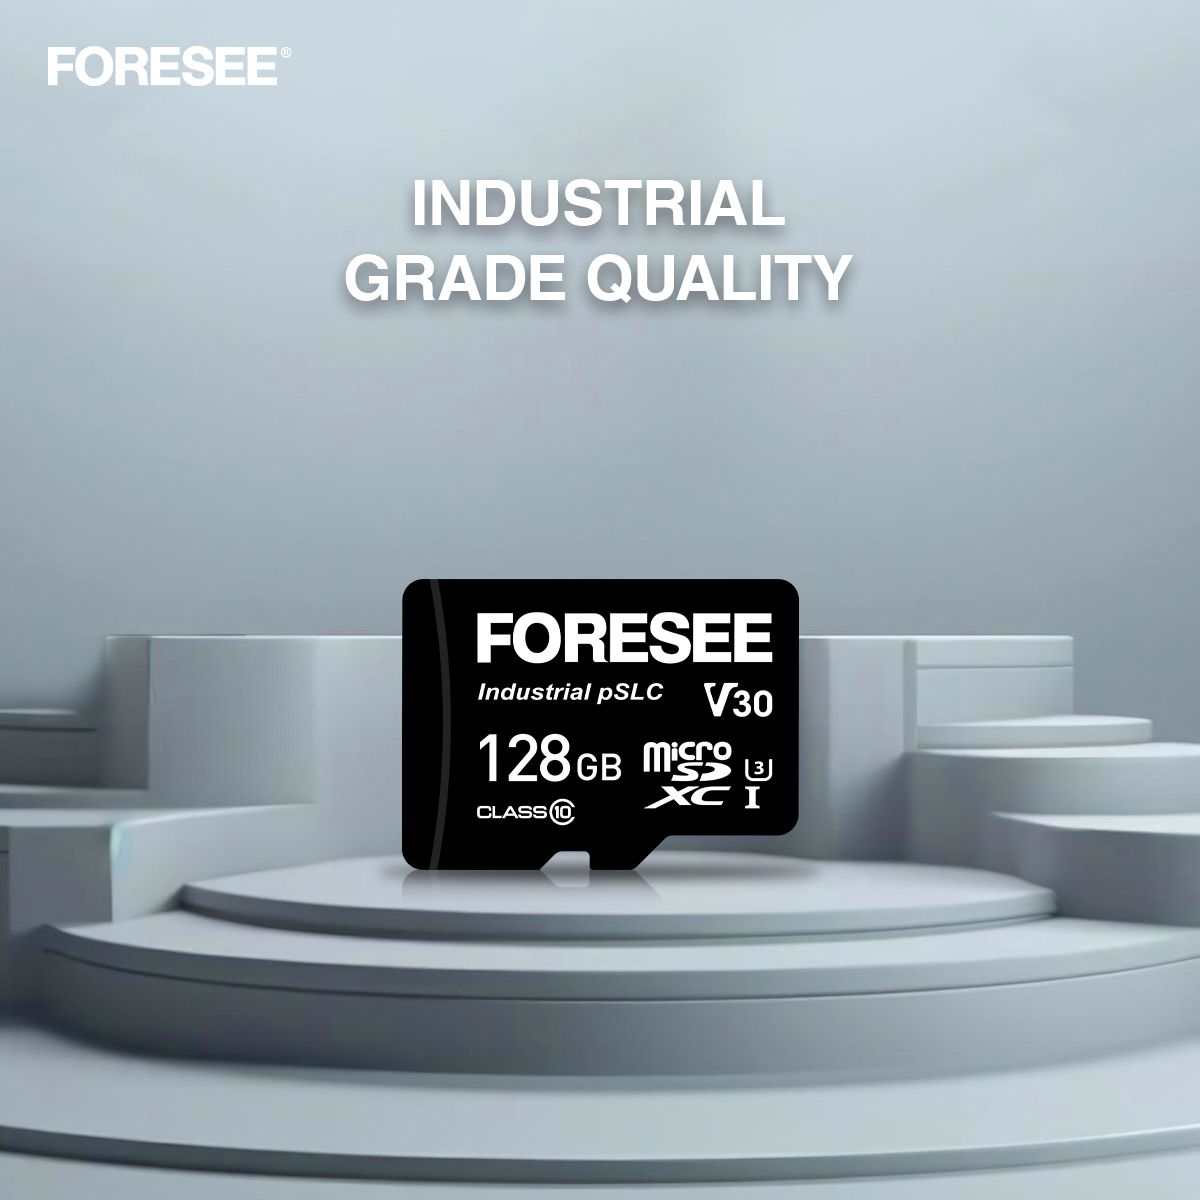 FORESEE Industrial pSLC microSD - Industrial Grade Quality